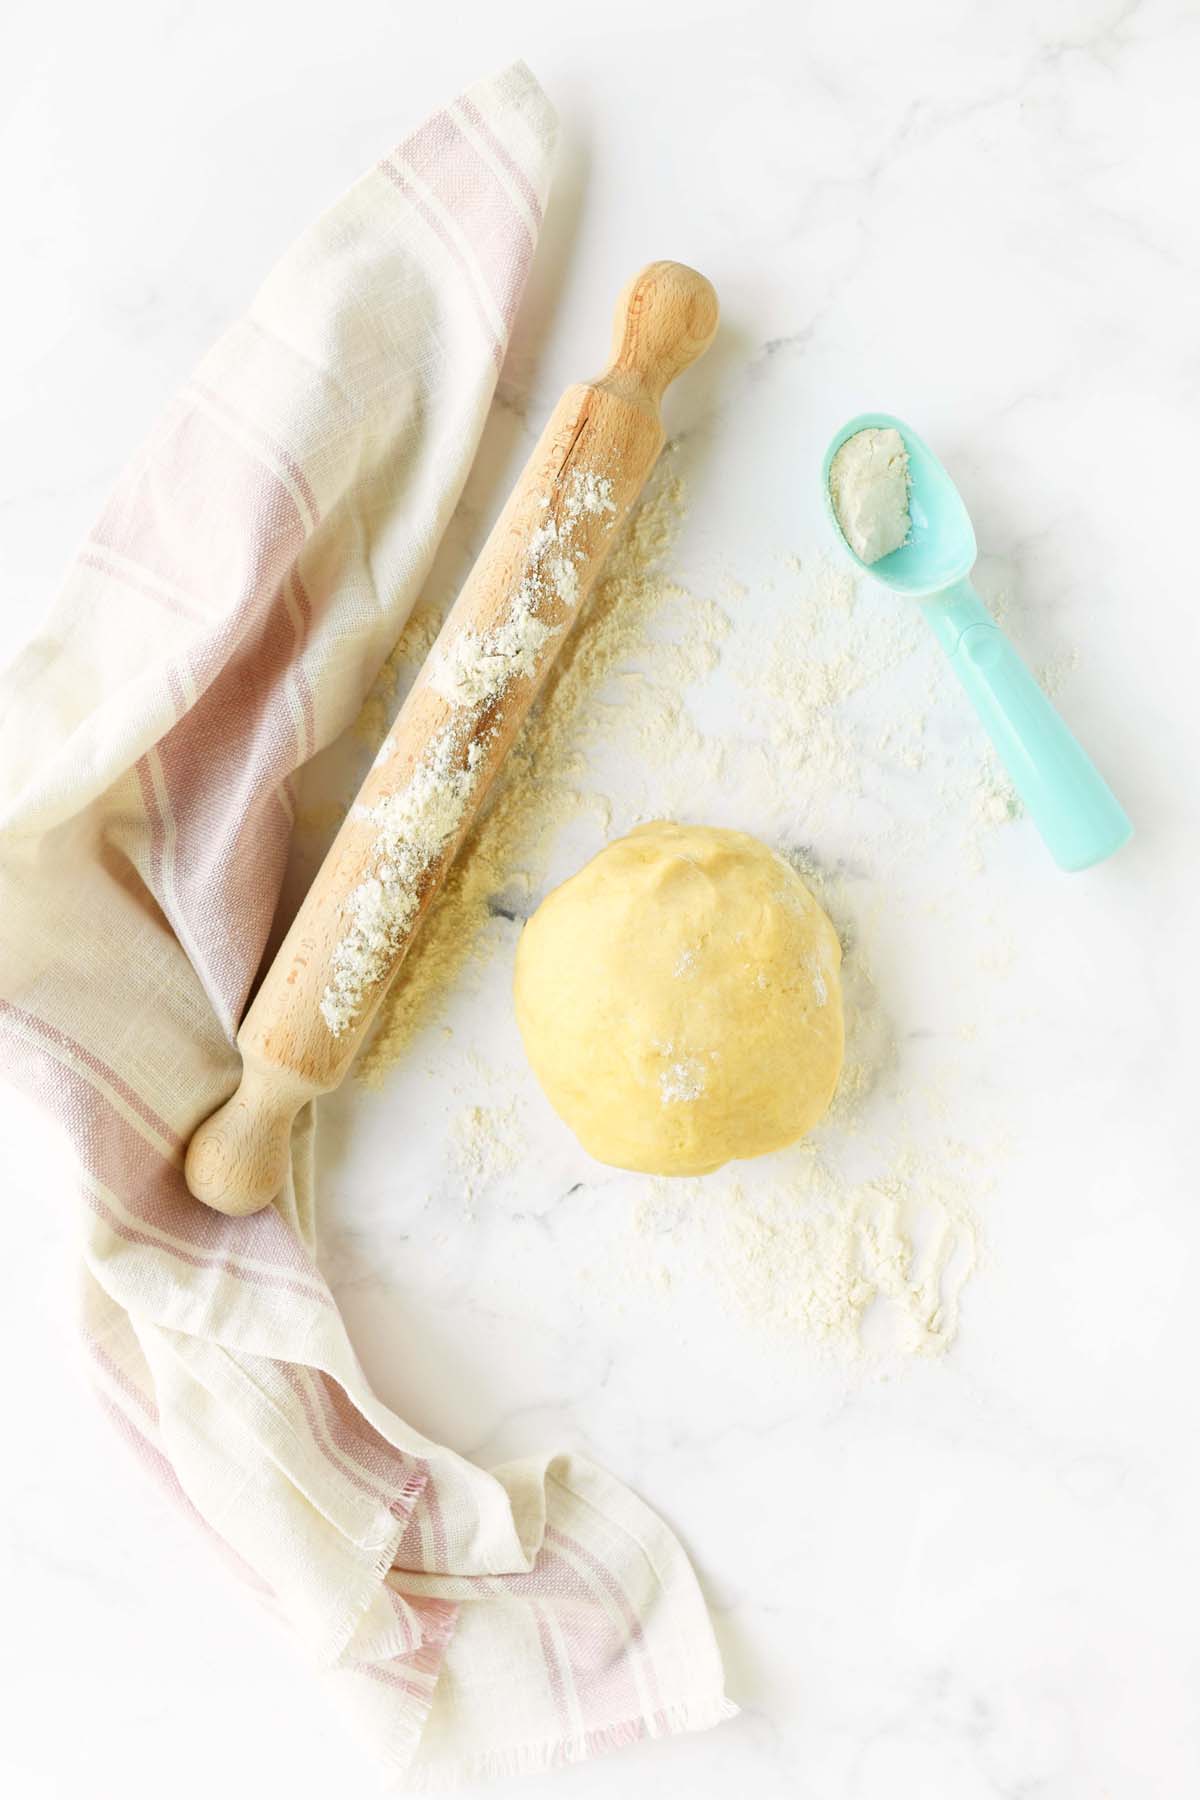 Fresh Pie Crust ball and wooden rolling pin.